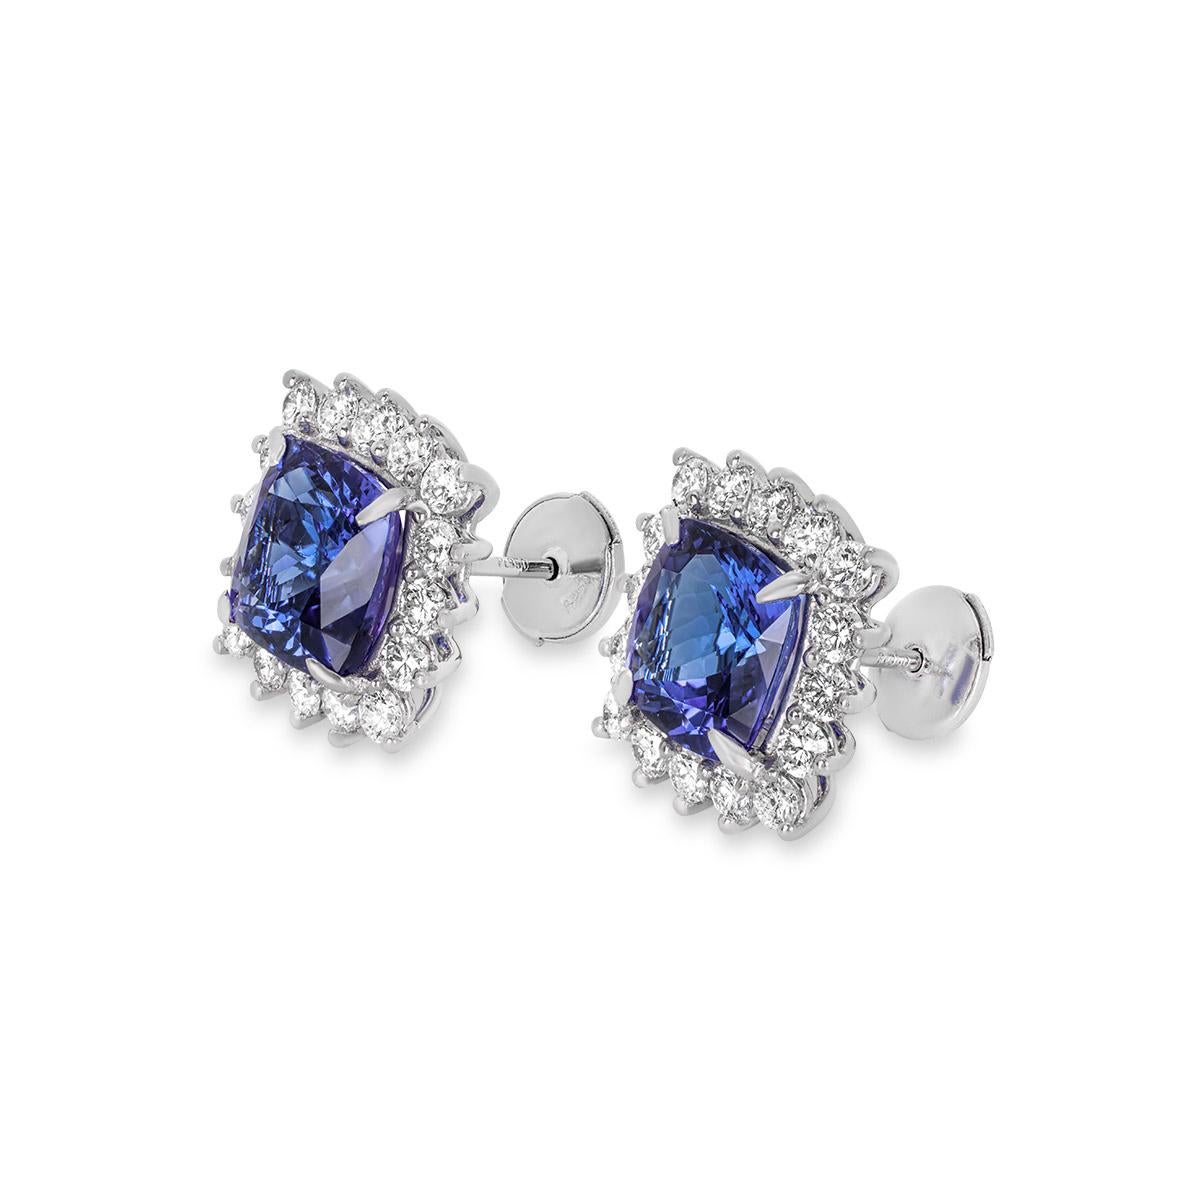 An alluring pair of platinum tanzanite and diamond stud earrings. The earrings are set to the centre with cushion cut tanzanites with an approximate total weight of 7.14ct and displaying a vivid violet-blue hue. Accentuating each tanzanite is a halo